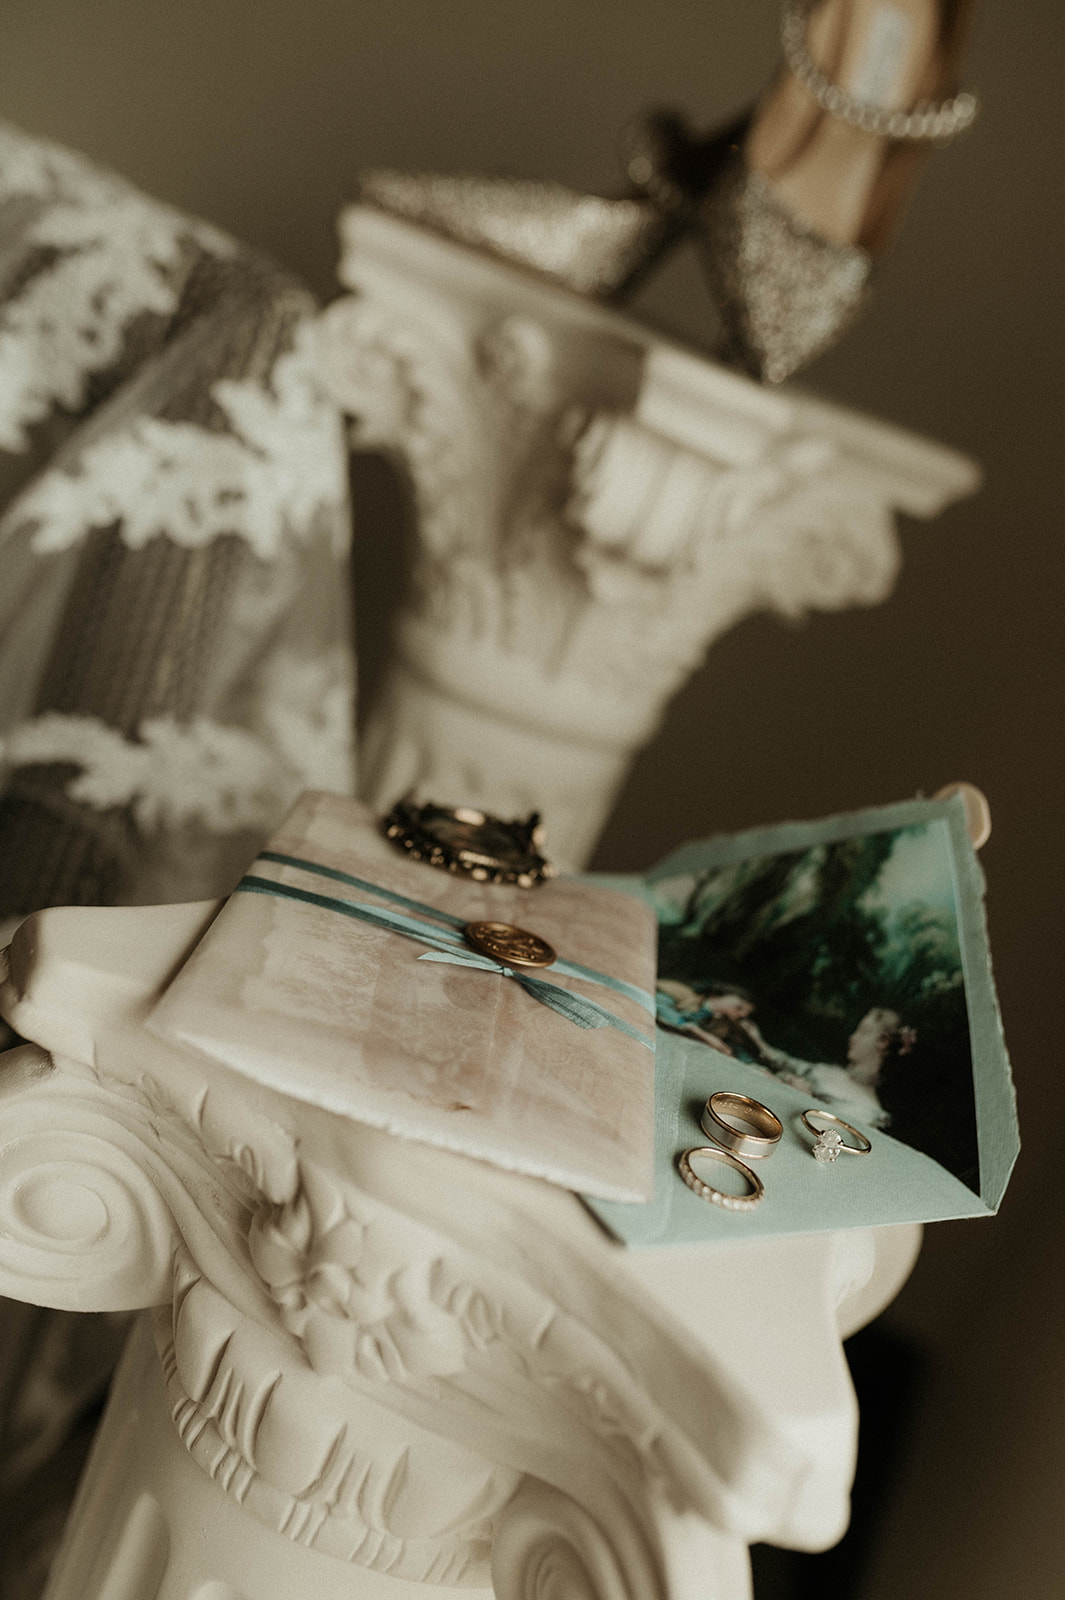 An antique-style photo featuring a stack of vintage wedding invitations, a romantic painting, a ribbon, and old jewelry on a creamy fabric background for a bridgerton wedding